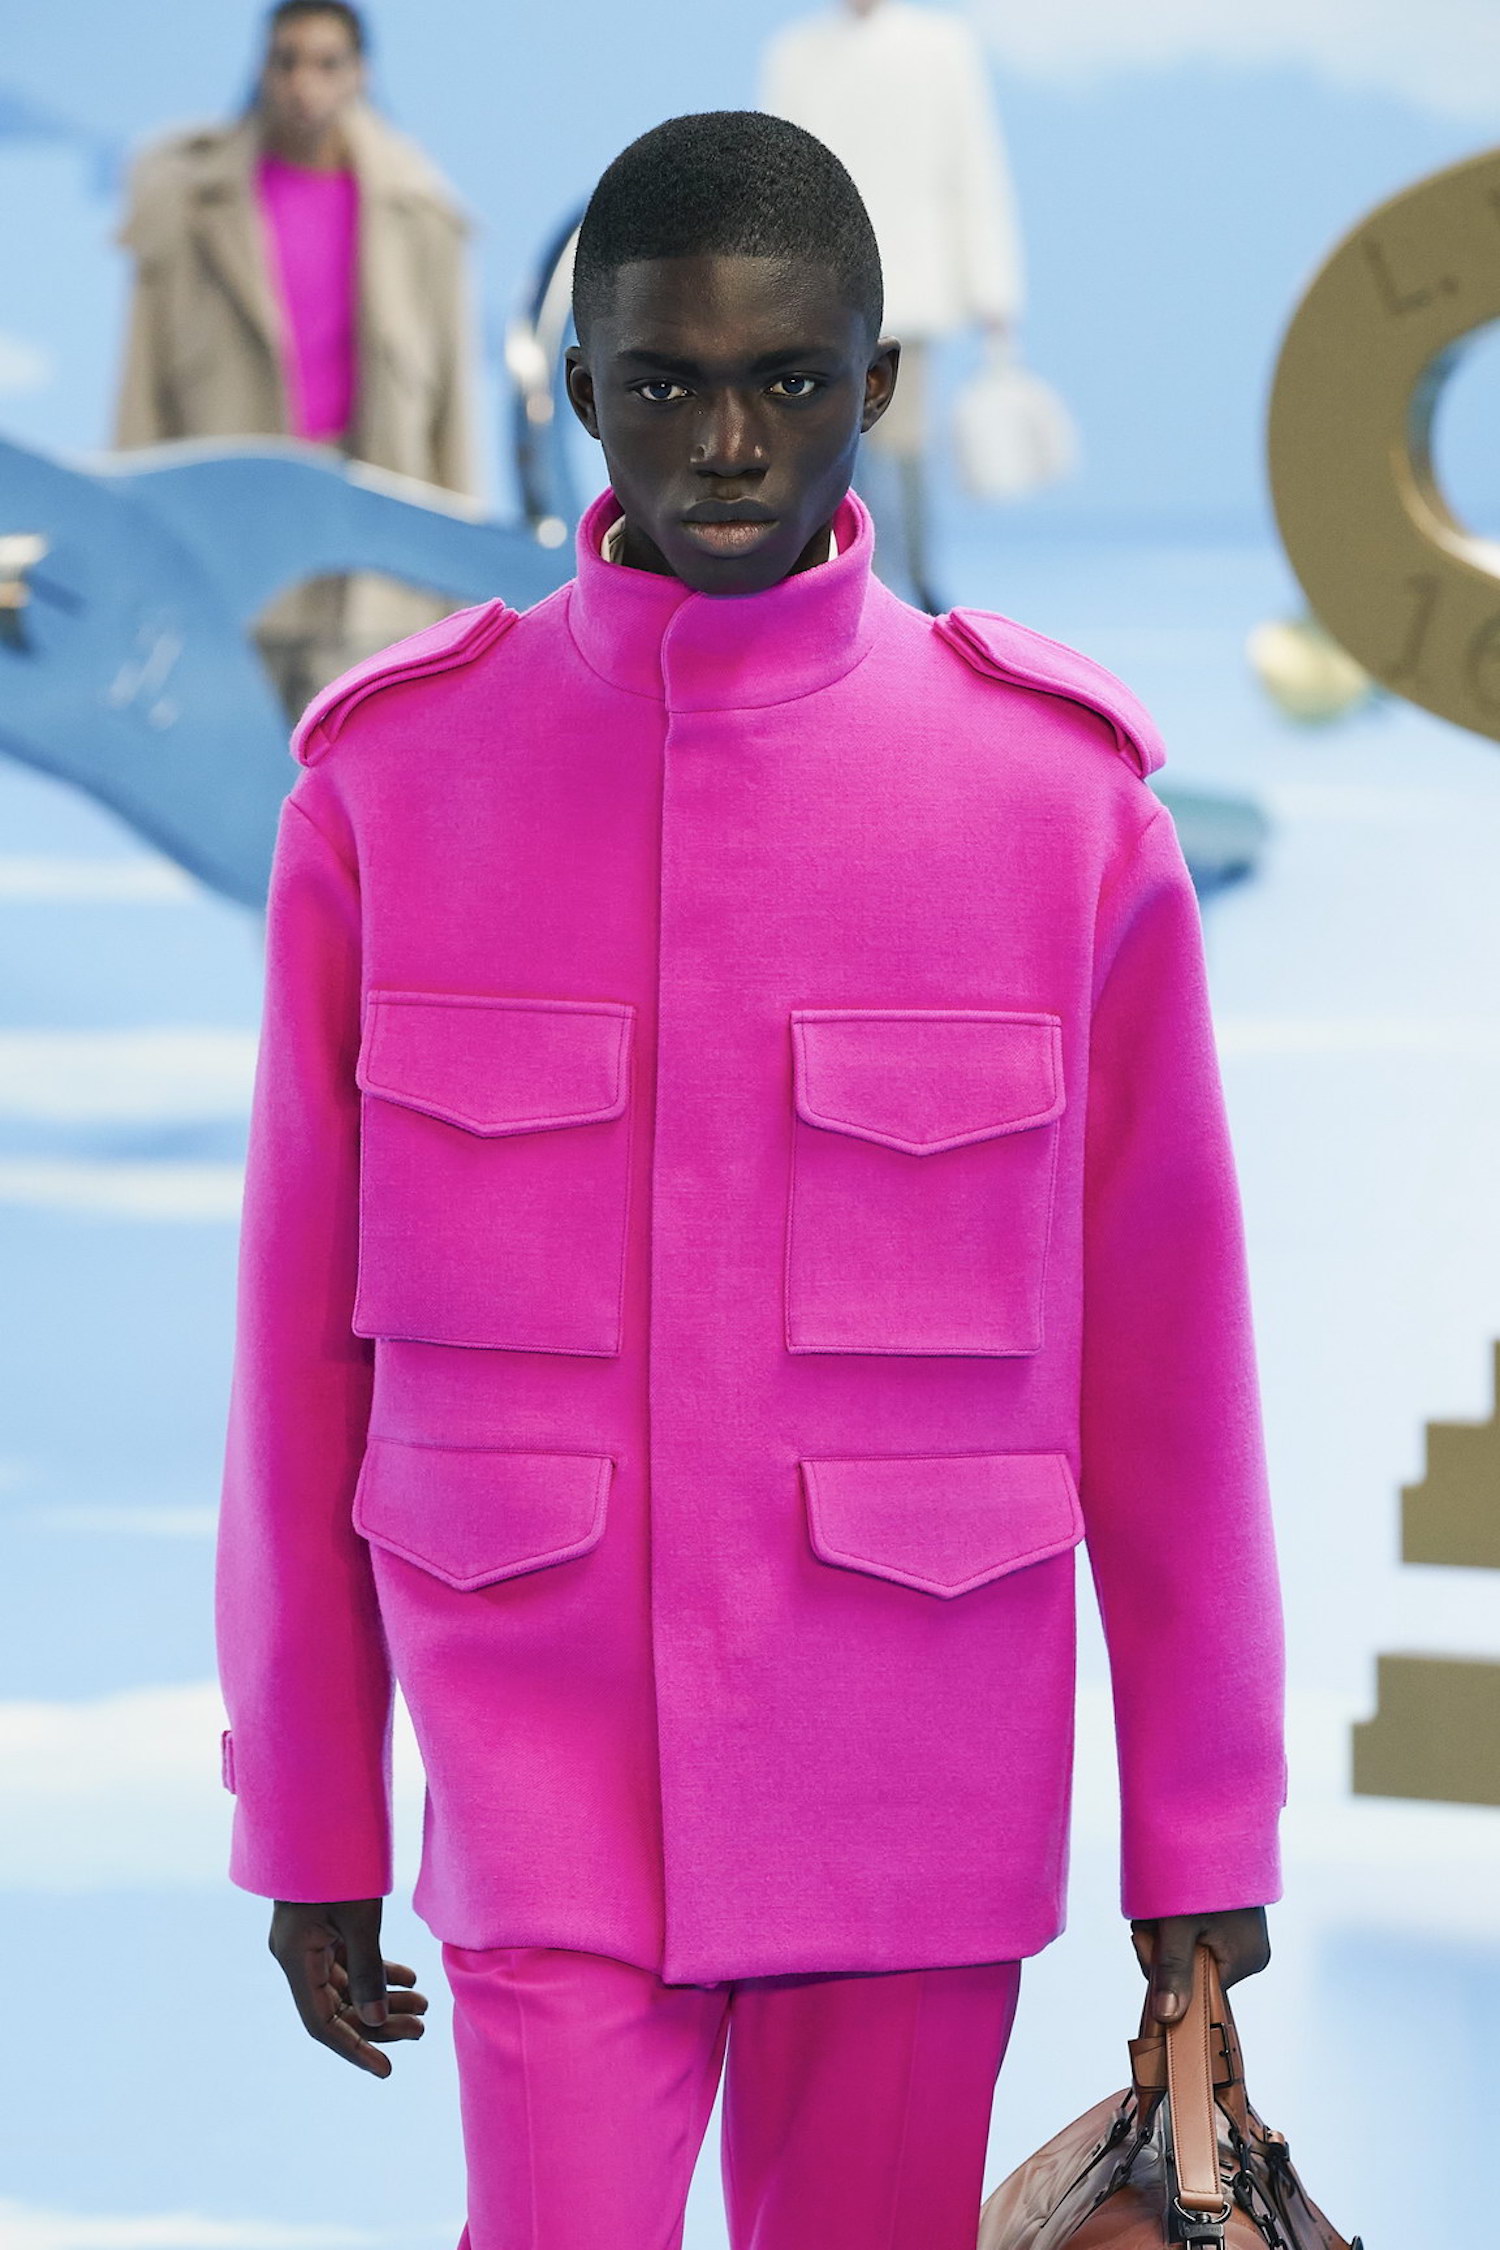 Louis Vuitton takes us into the sky with their new AW20 menswear campaign -  The Glass Magazine